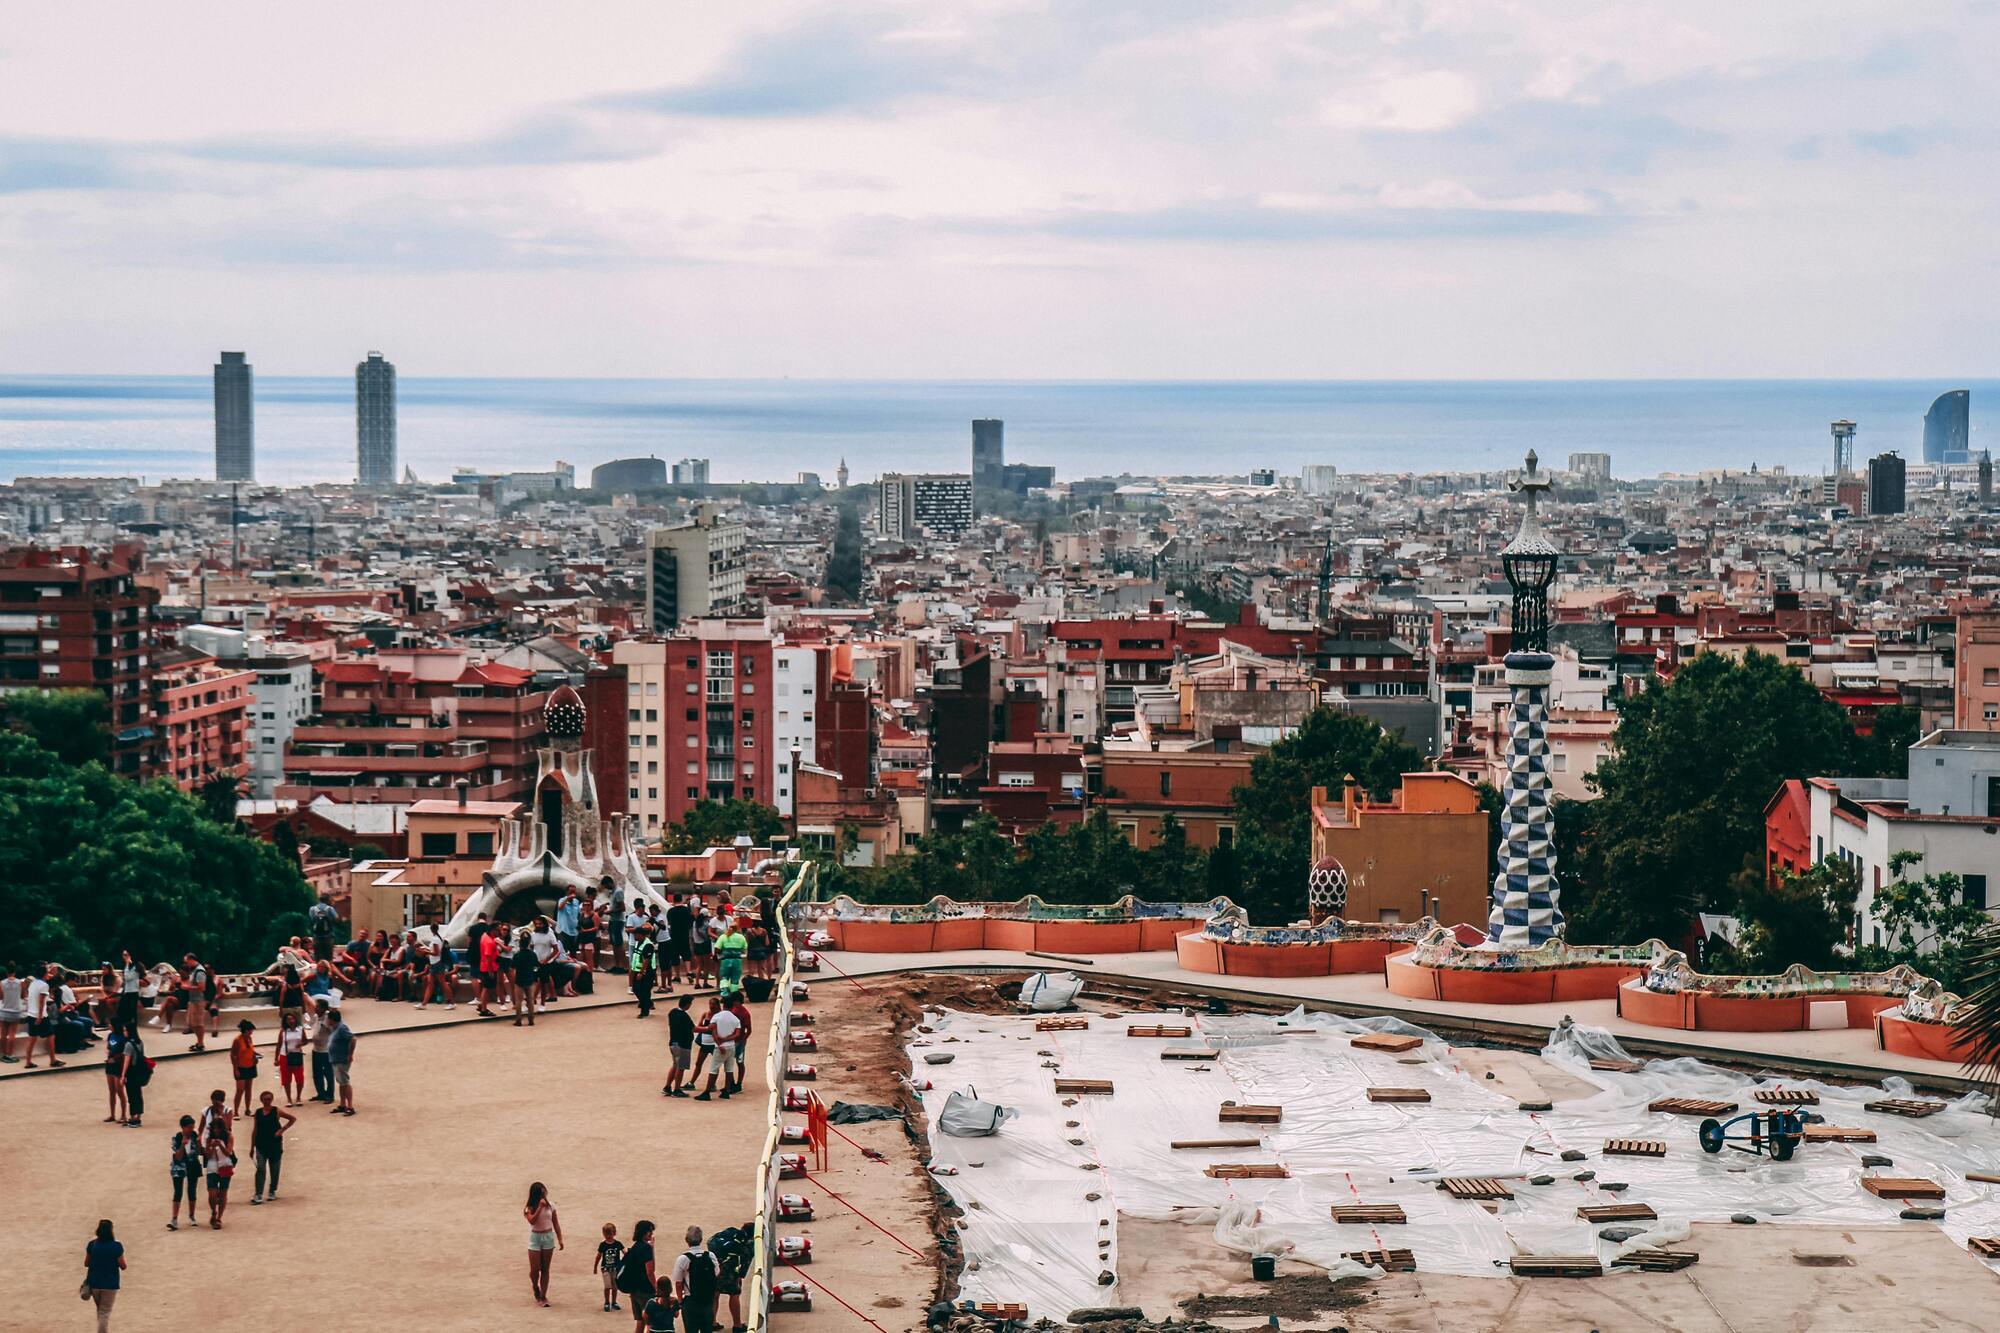 Where to stay in Barcelona so you don't miss out on the most important things. A guide to neighborhoods and places of interest